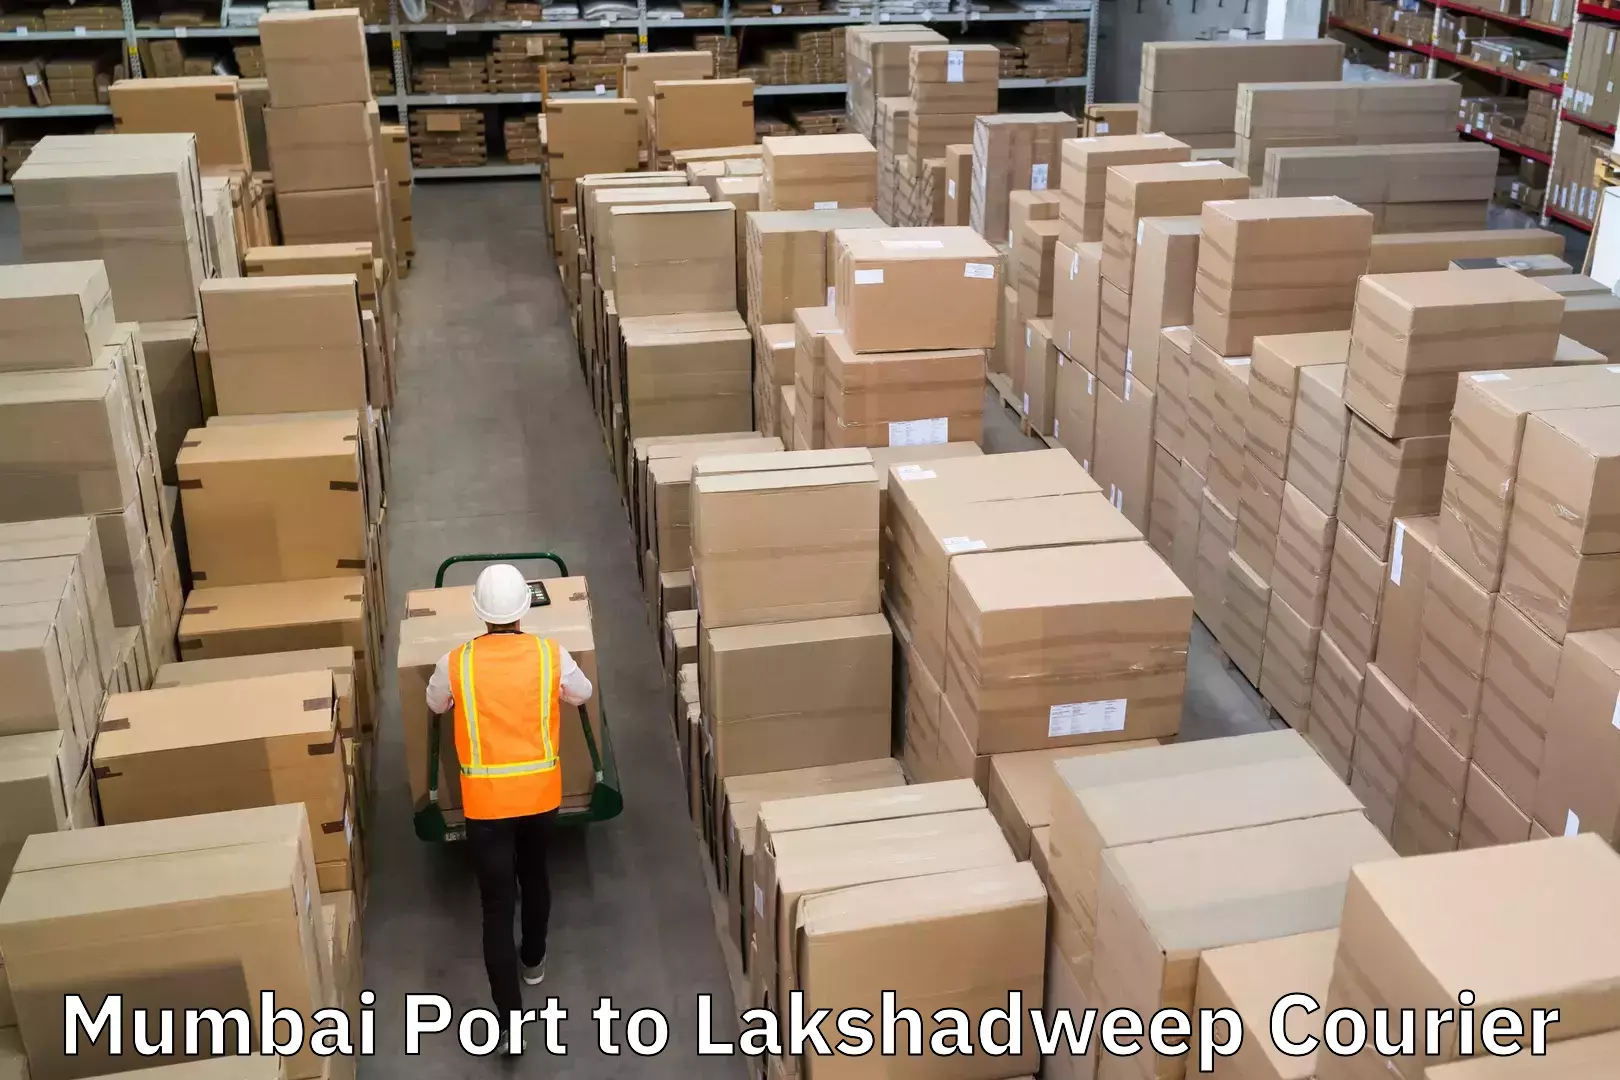 Professional delivery solutions Mumbai Port to Lakshadweep